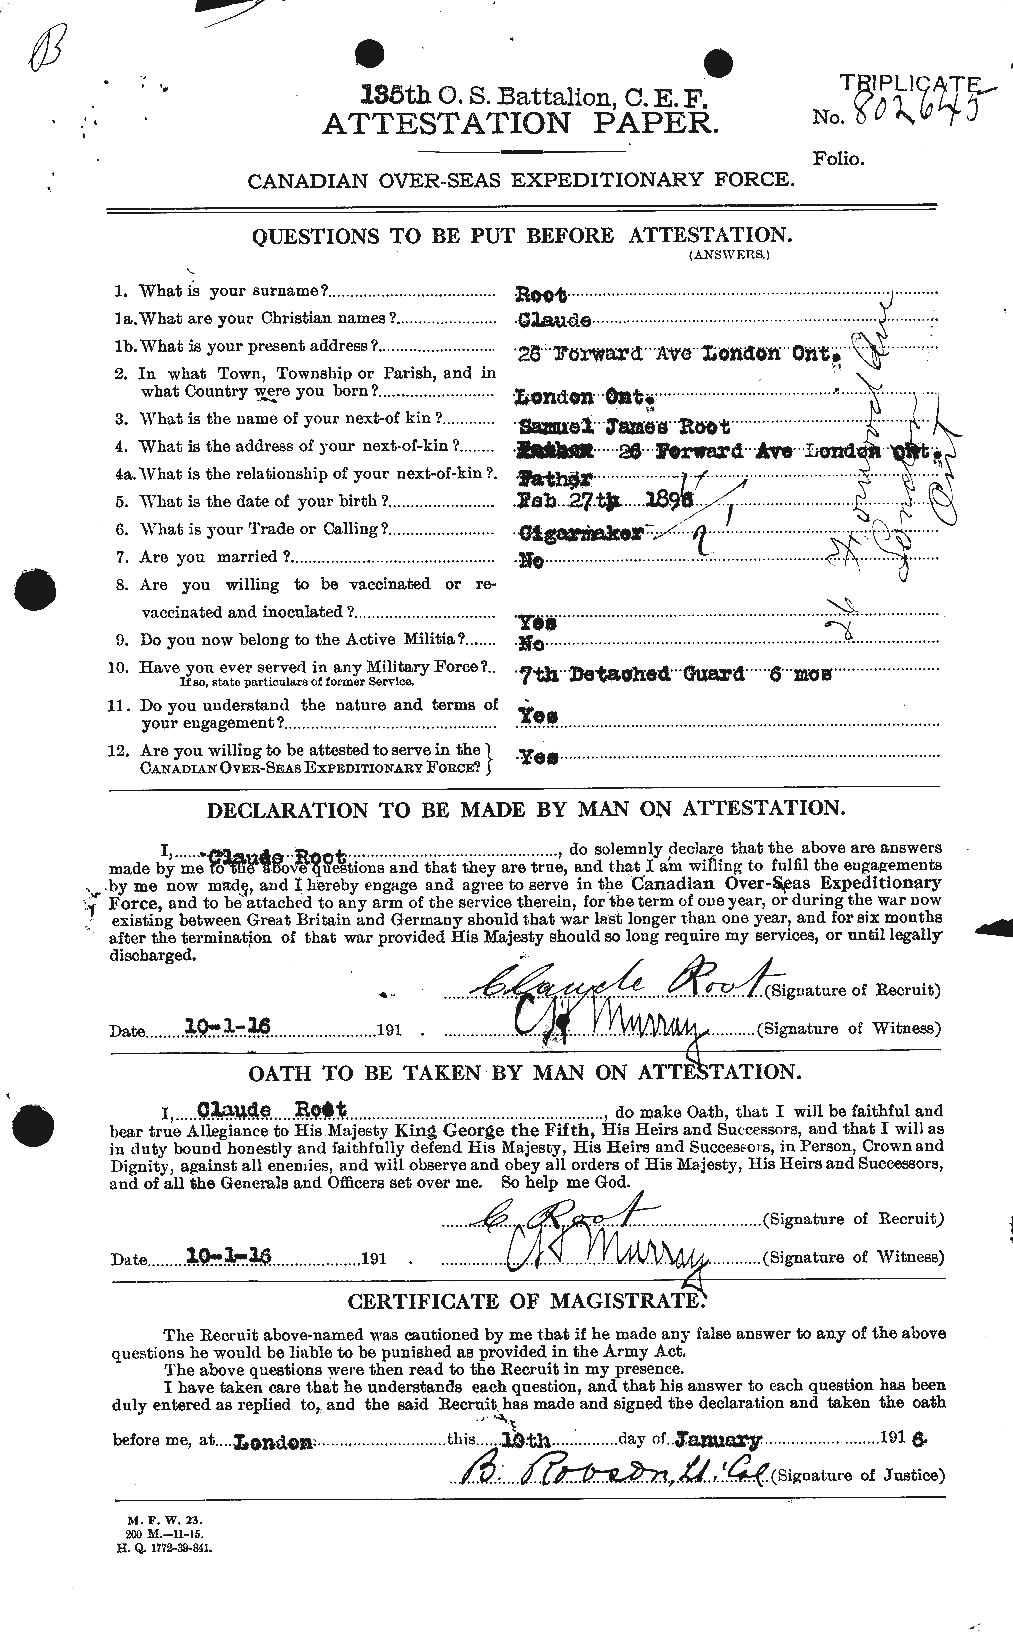 Personnel Records of the First World War - CEF 610542a